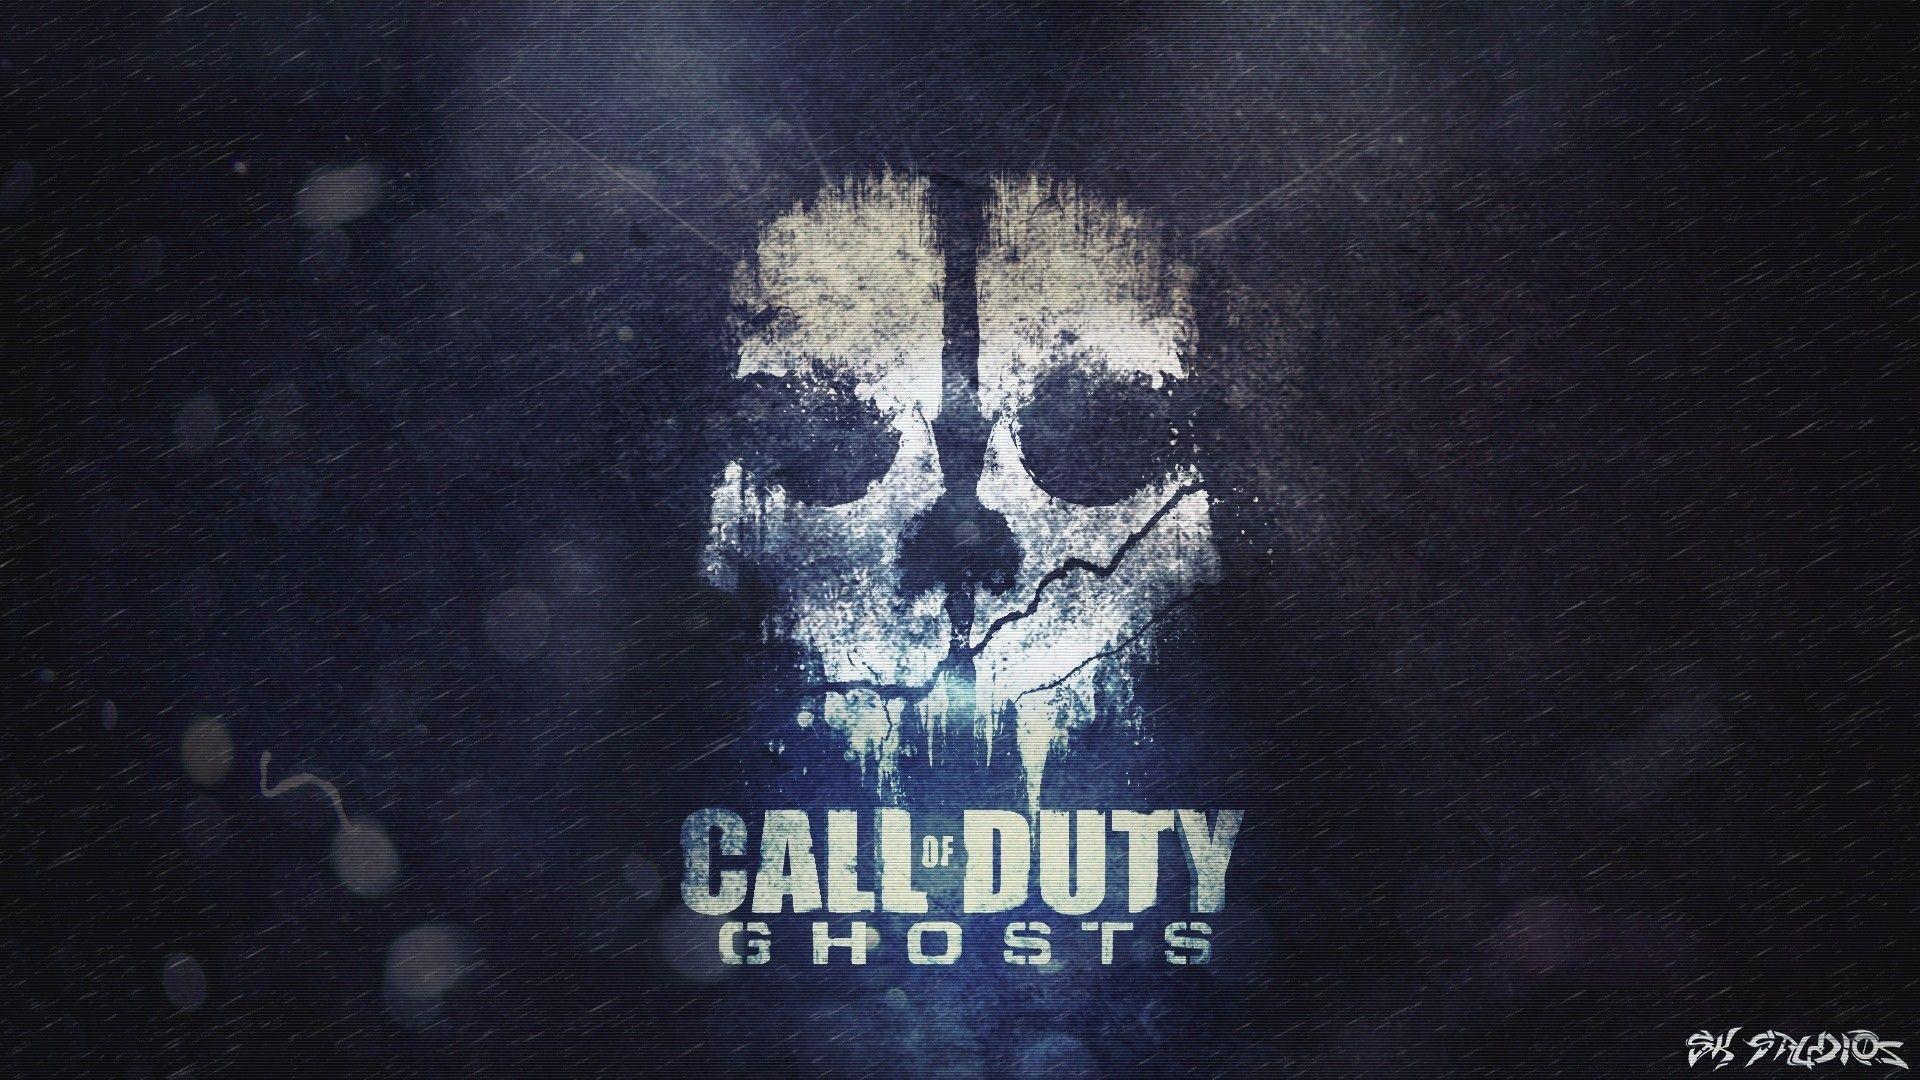 COD GHOSTS SKULL. Android wallpaper for free